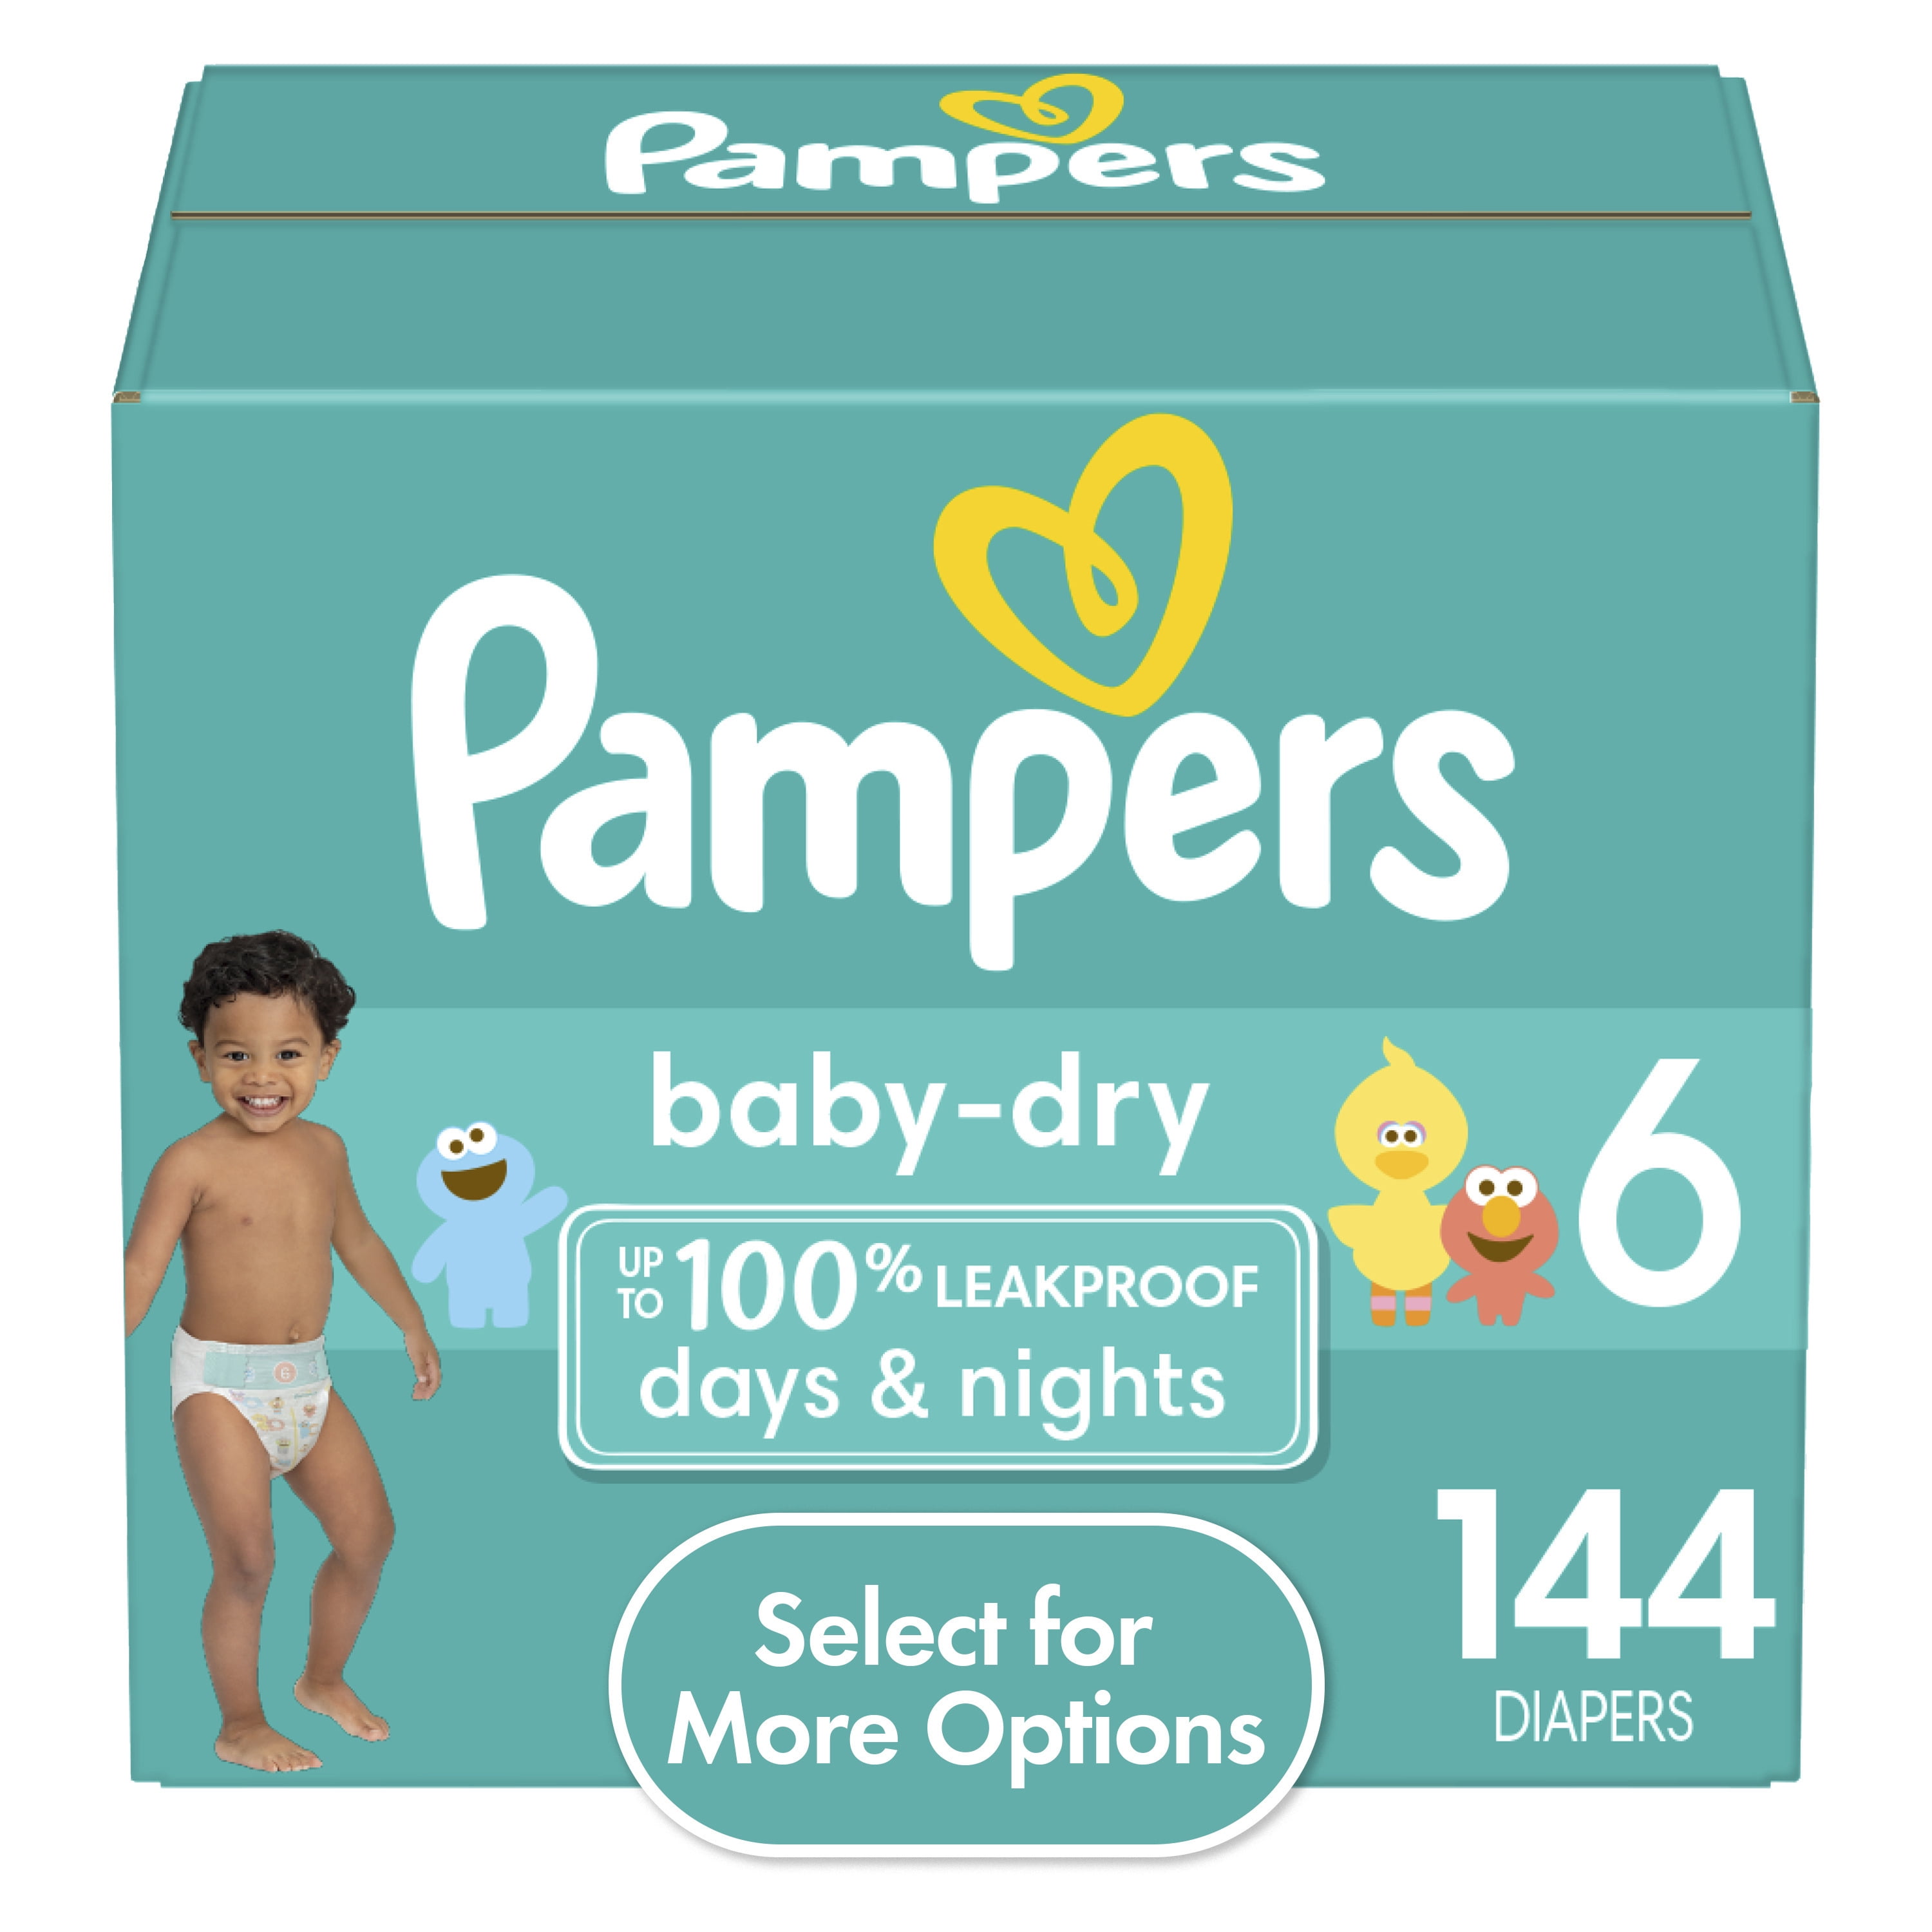 pampers extra protection